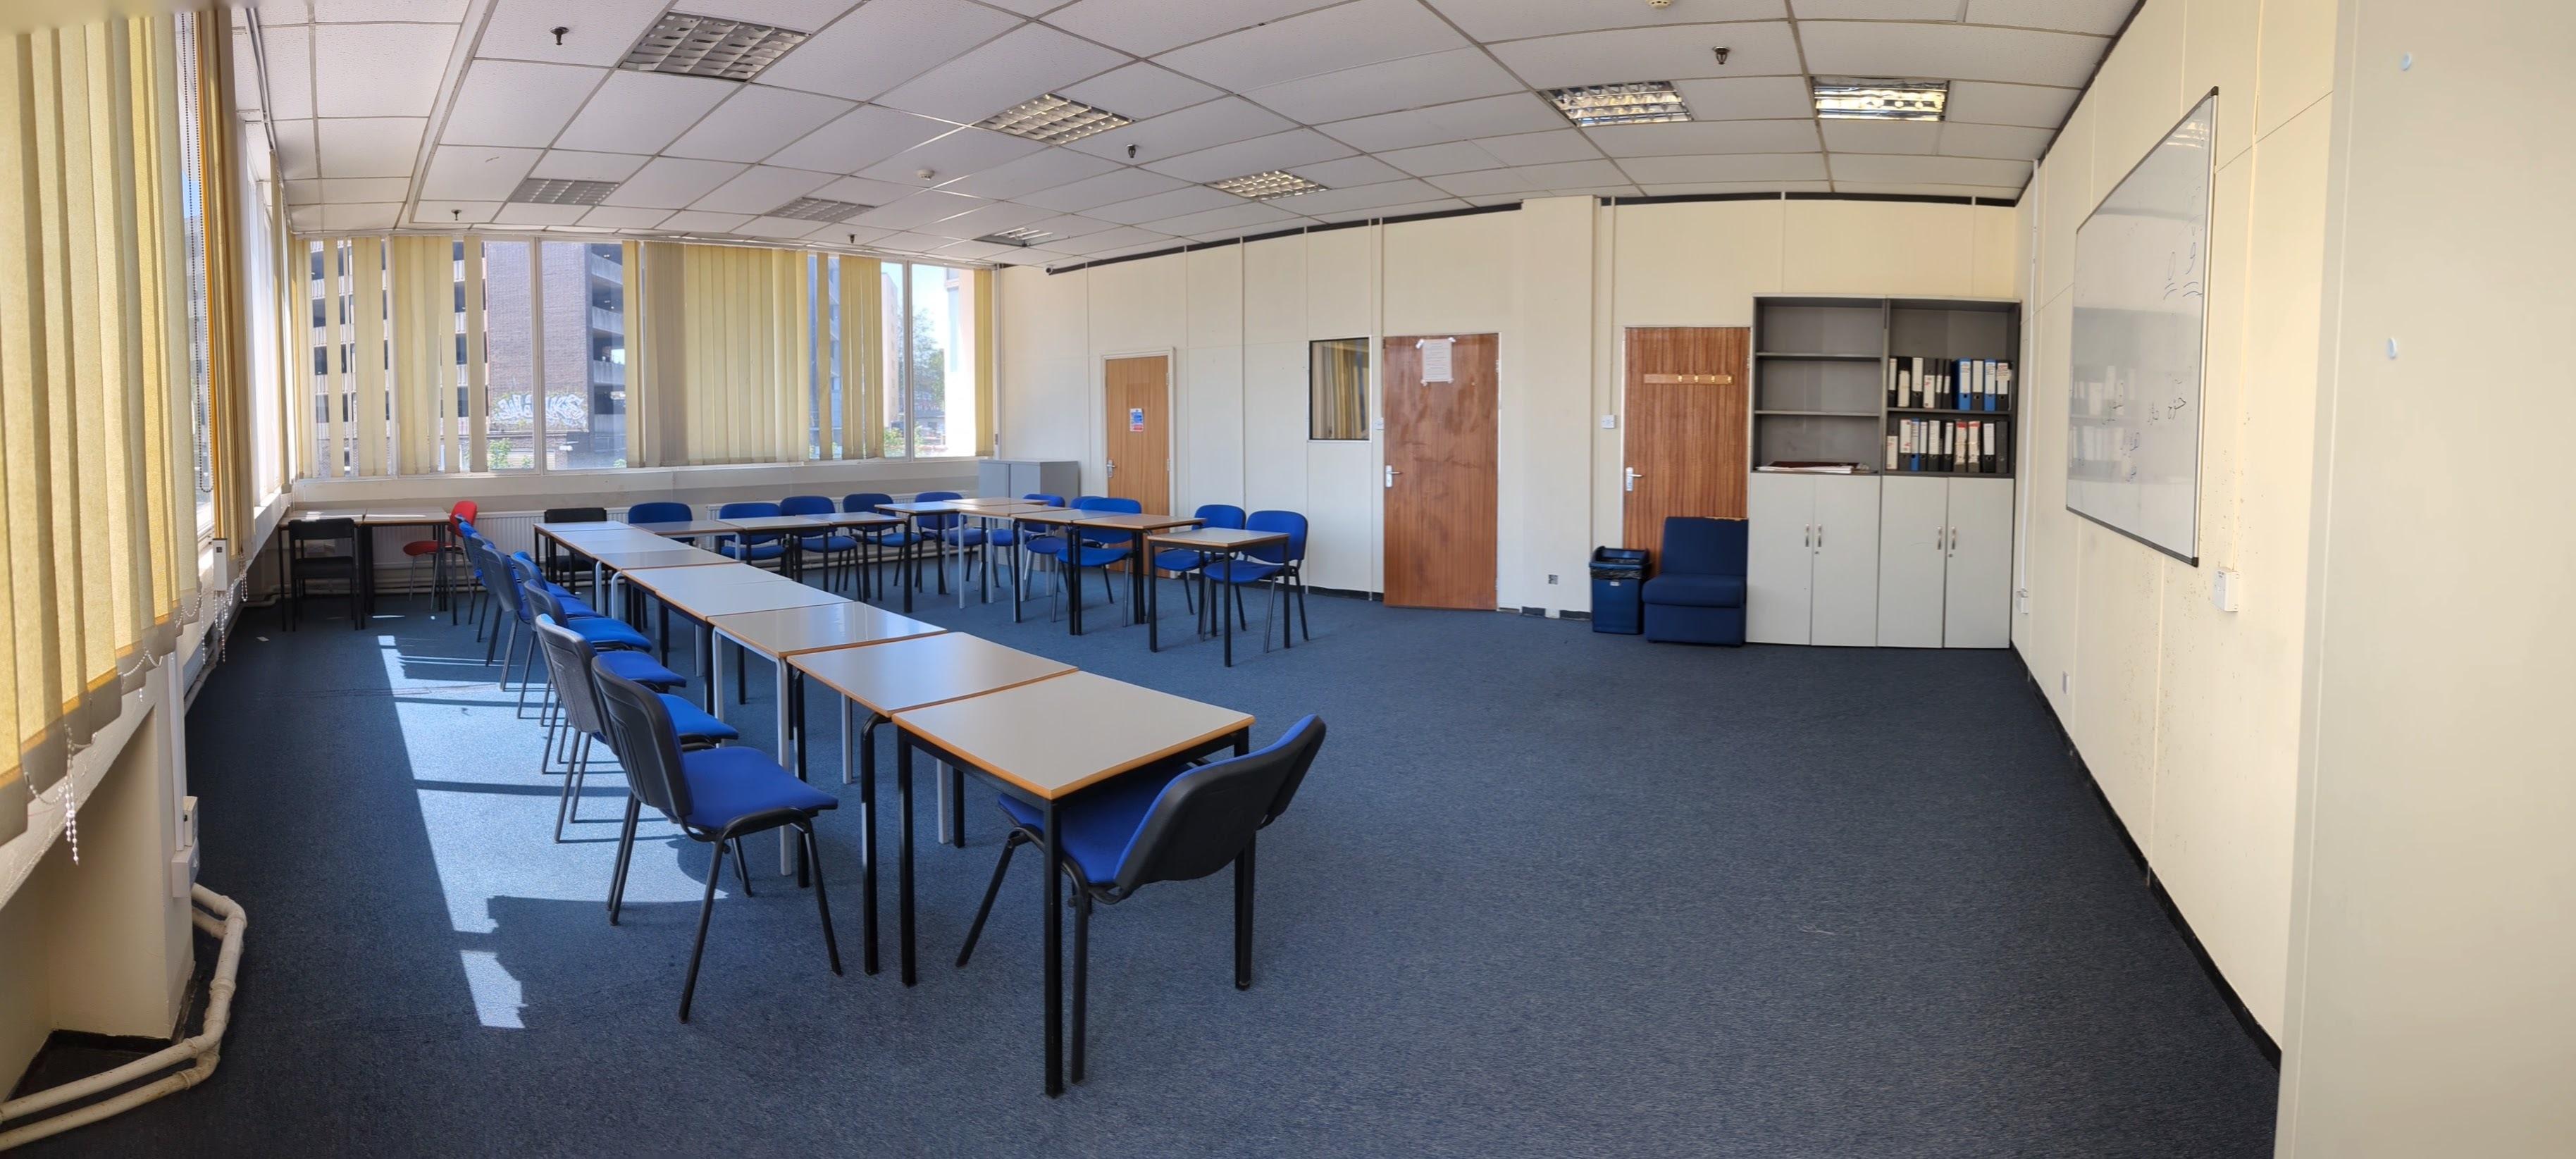 The Woolwich College, Classroom photo #1